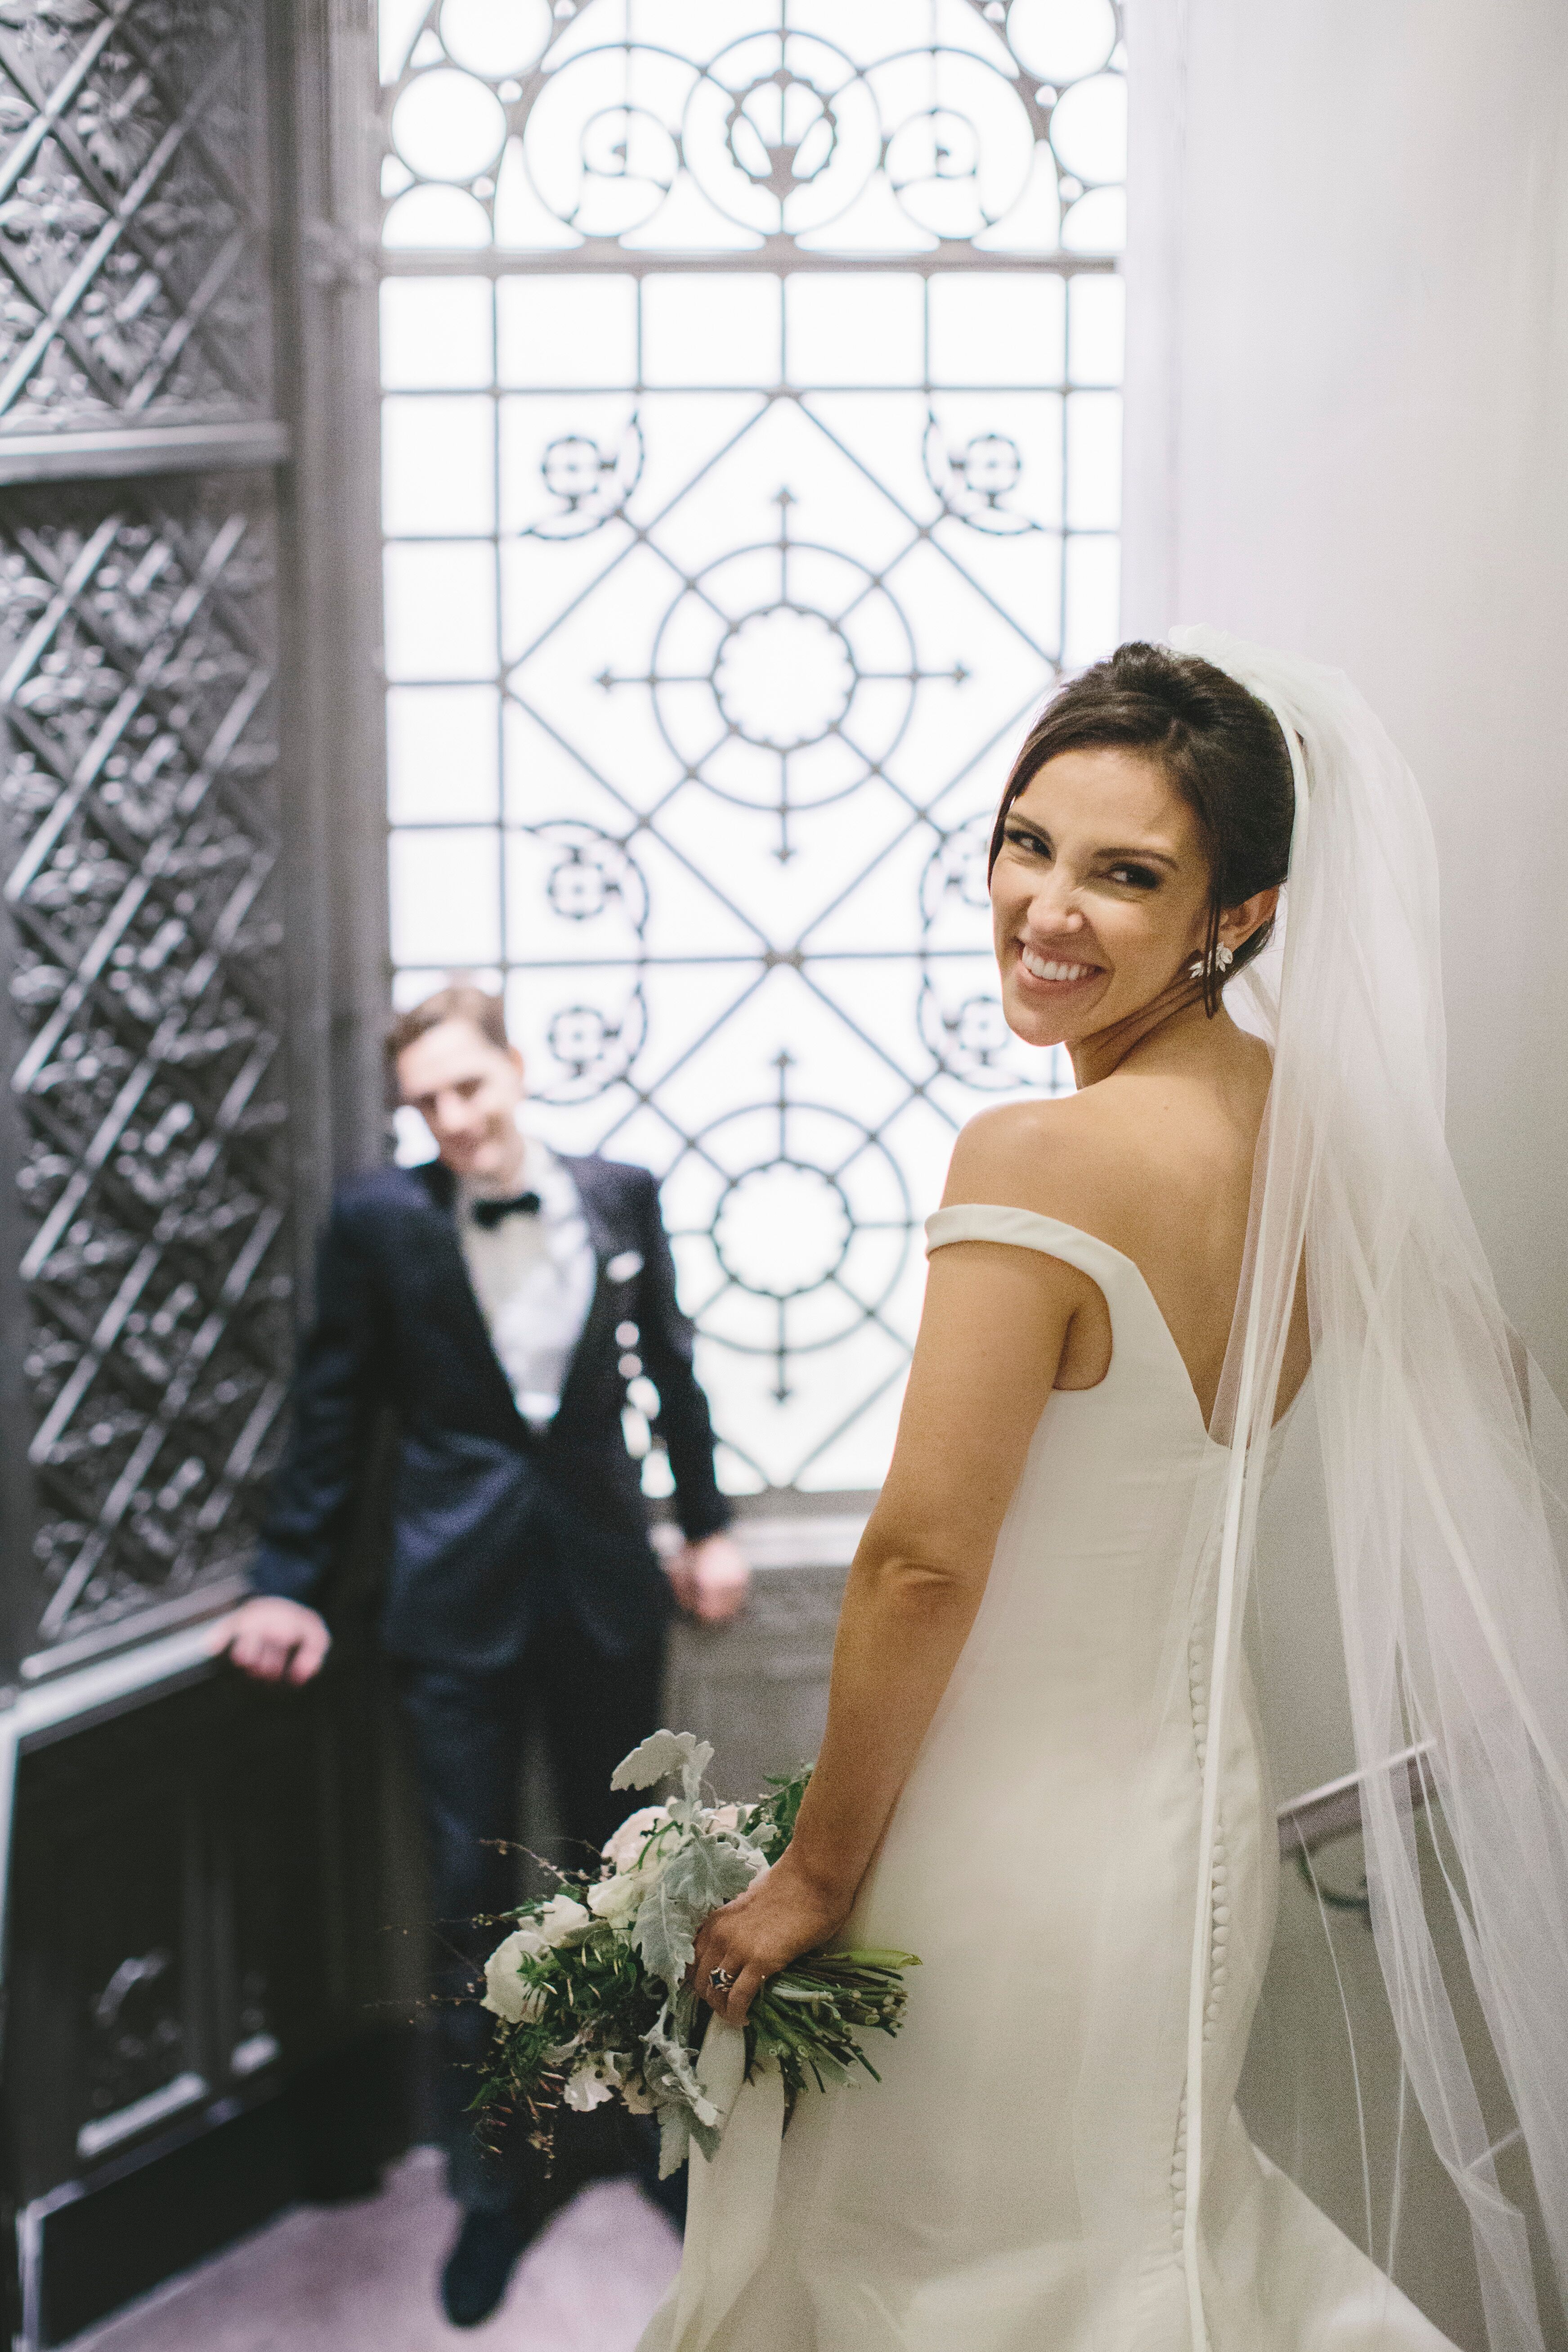 Classic Off-the-Shoulder Gown with Veil